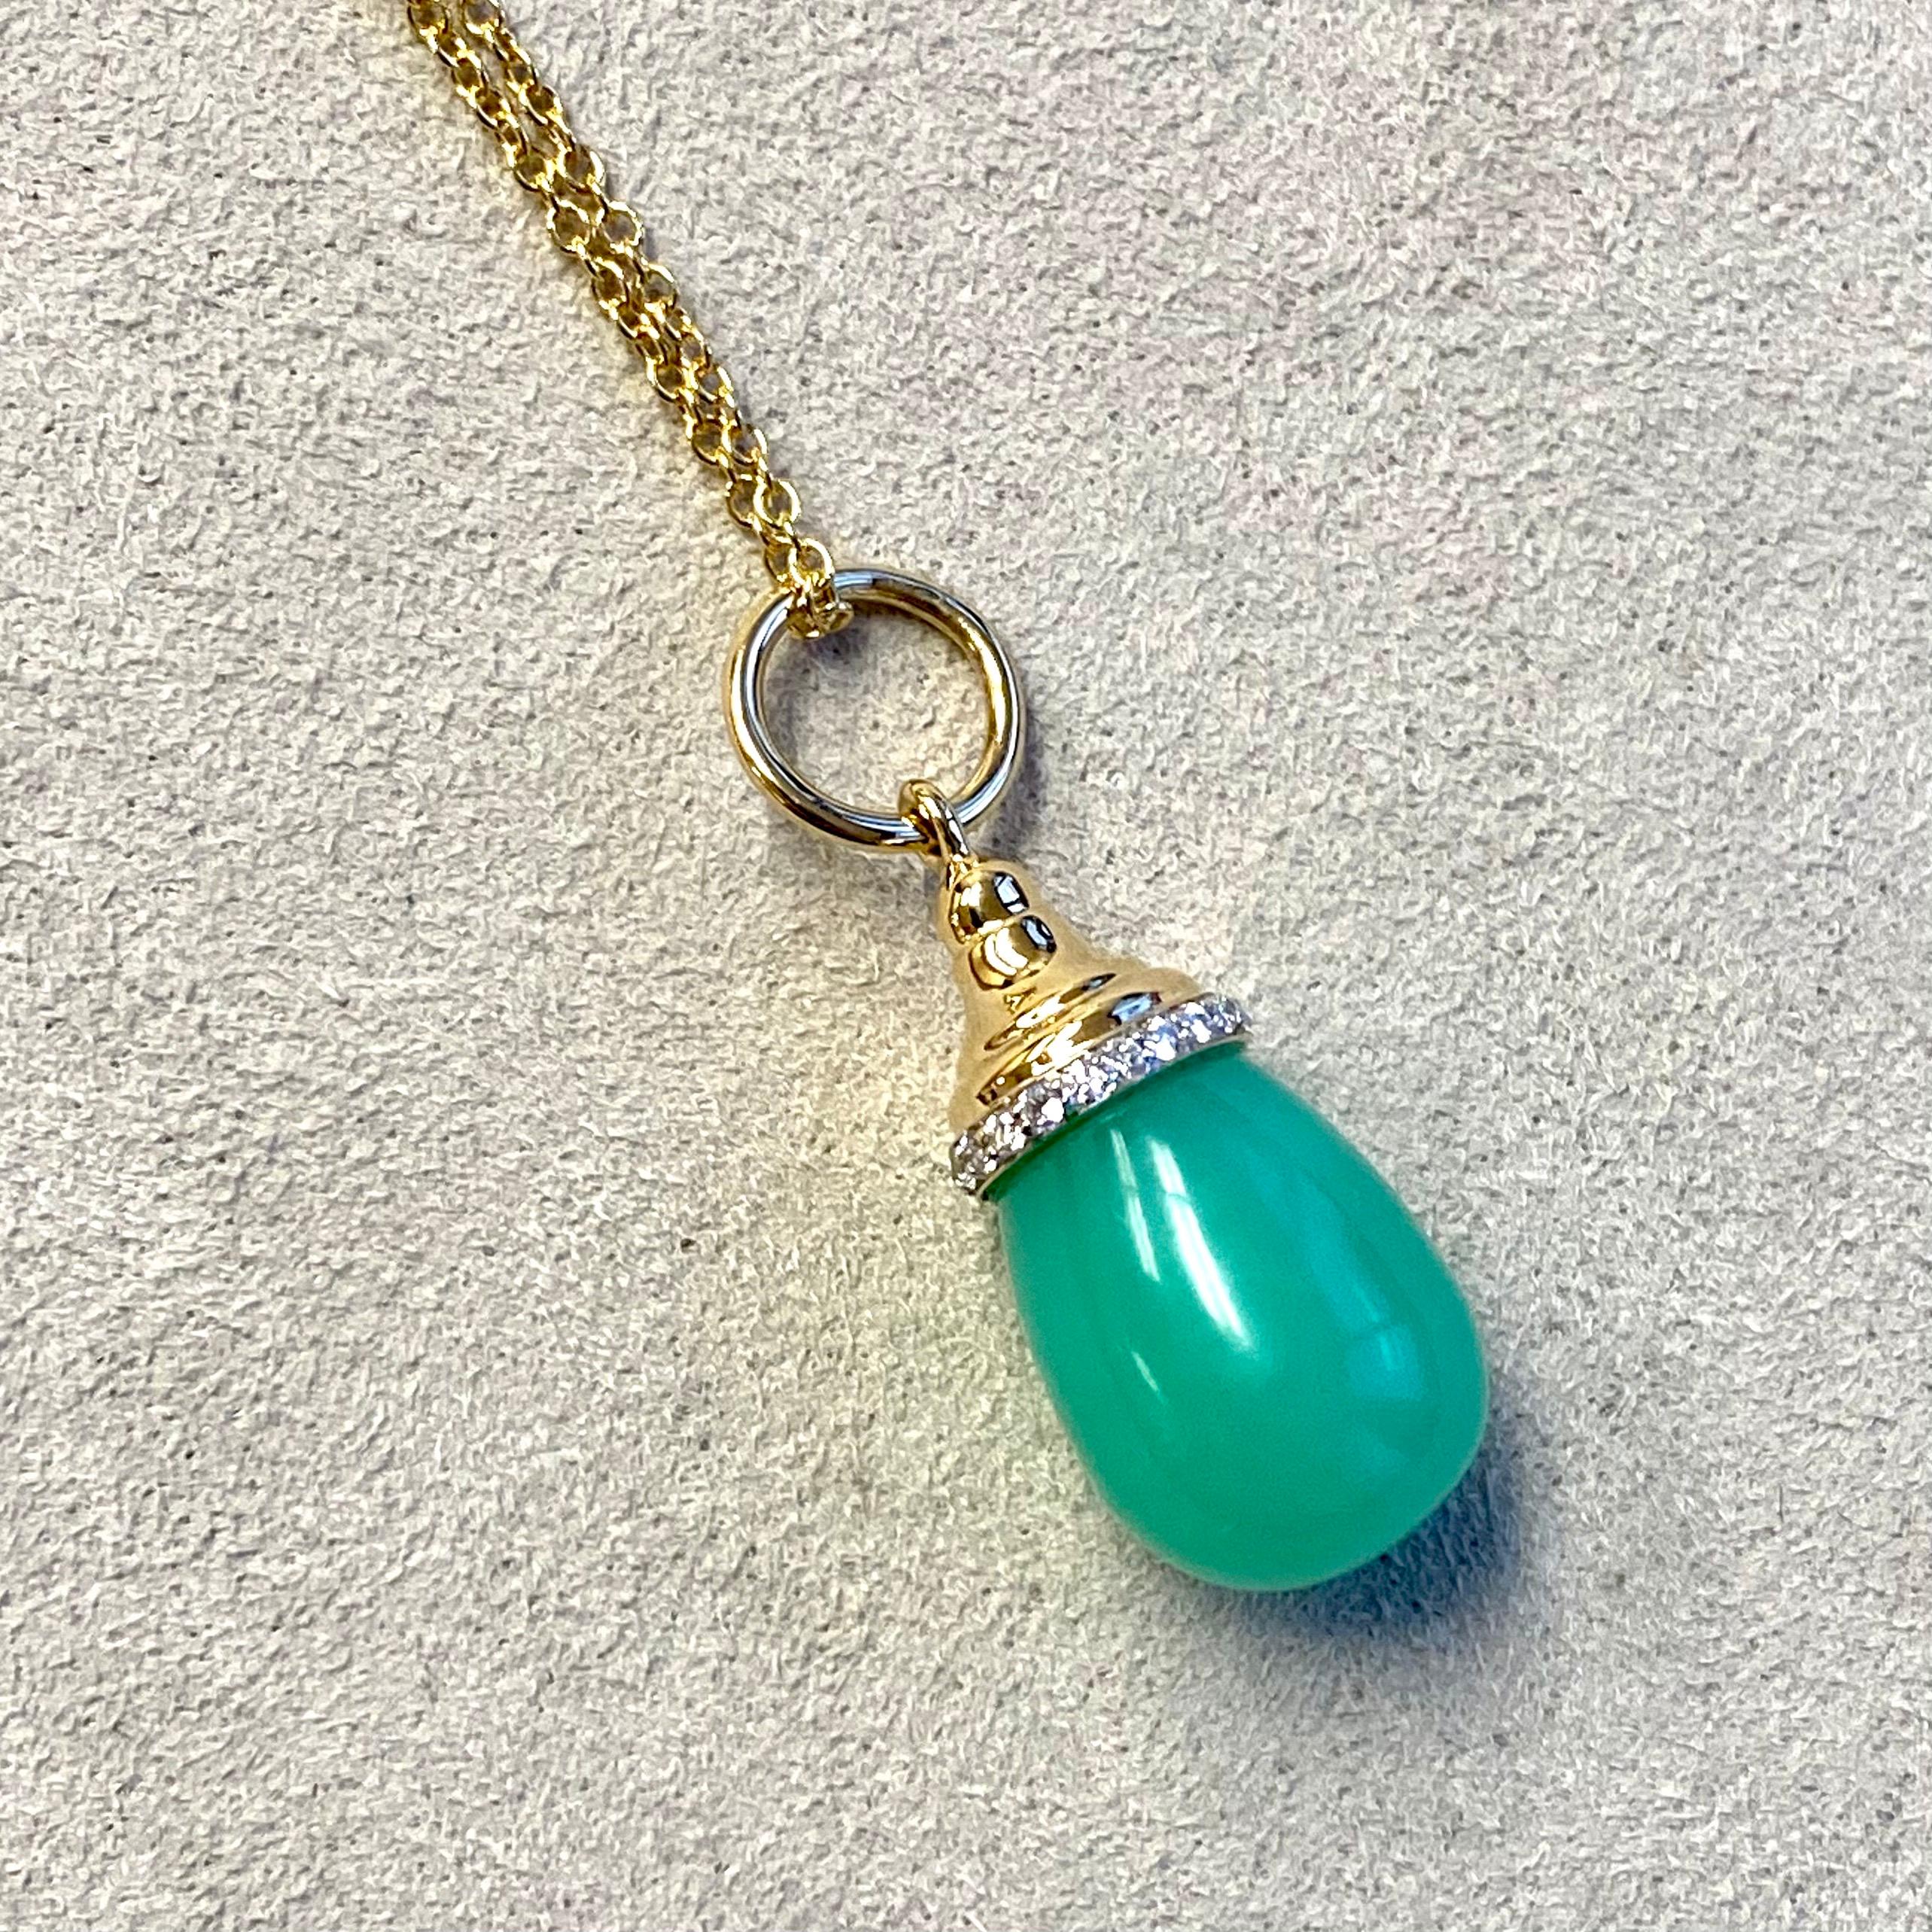 Created in 18 karat yellow gold
18 inch length
Chrysoprase 10 carats approx.
Diamonds 0.10 carat approx.

Handcrafted in 18 karat yellow gold, this pendant hangs delicately atop an 18-inch chain, adorned with an ethereal 10-carat Chrysoprase and